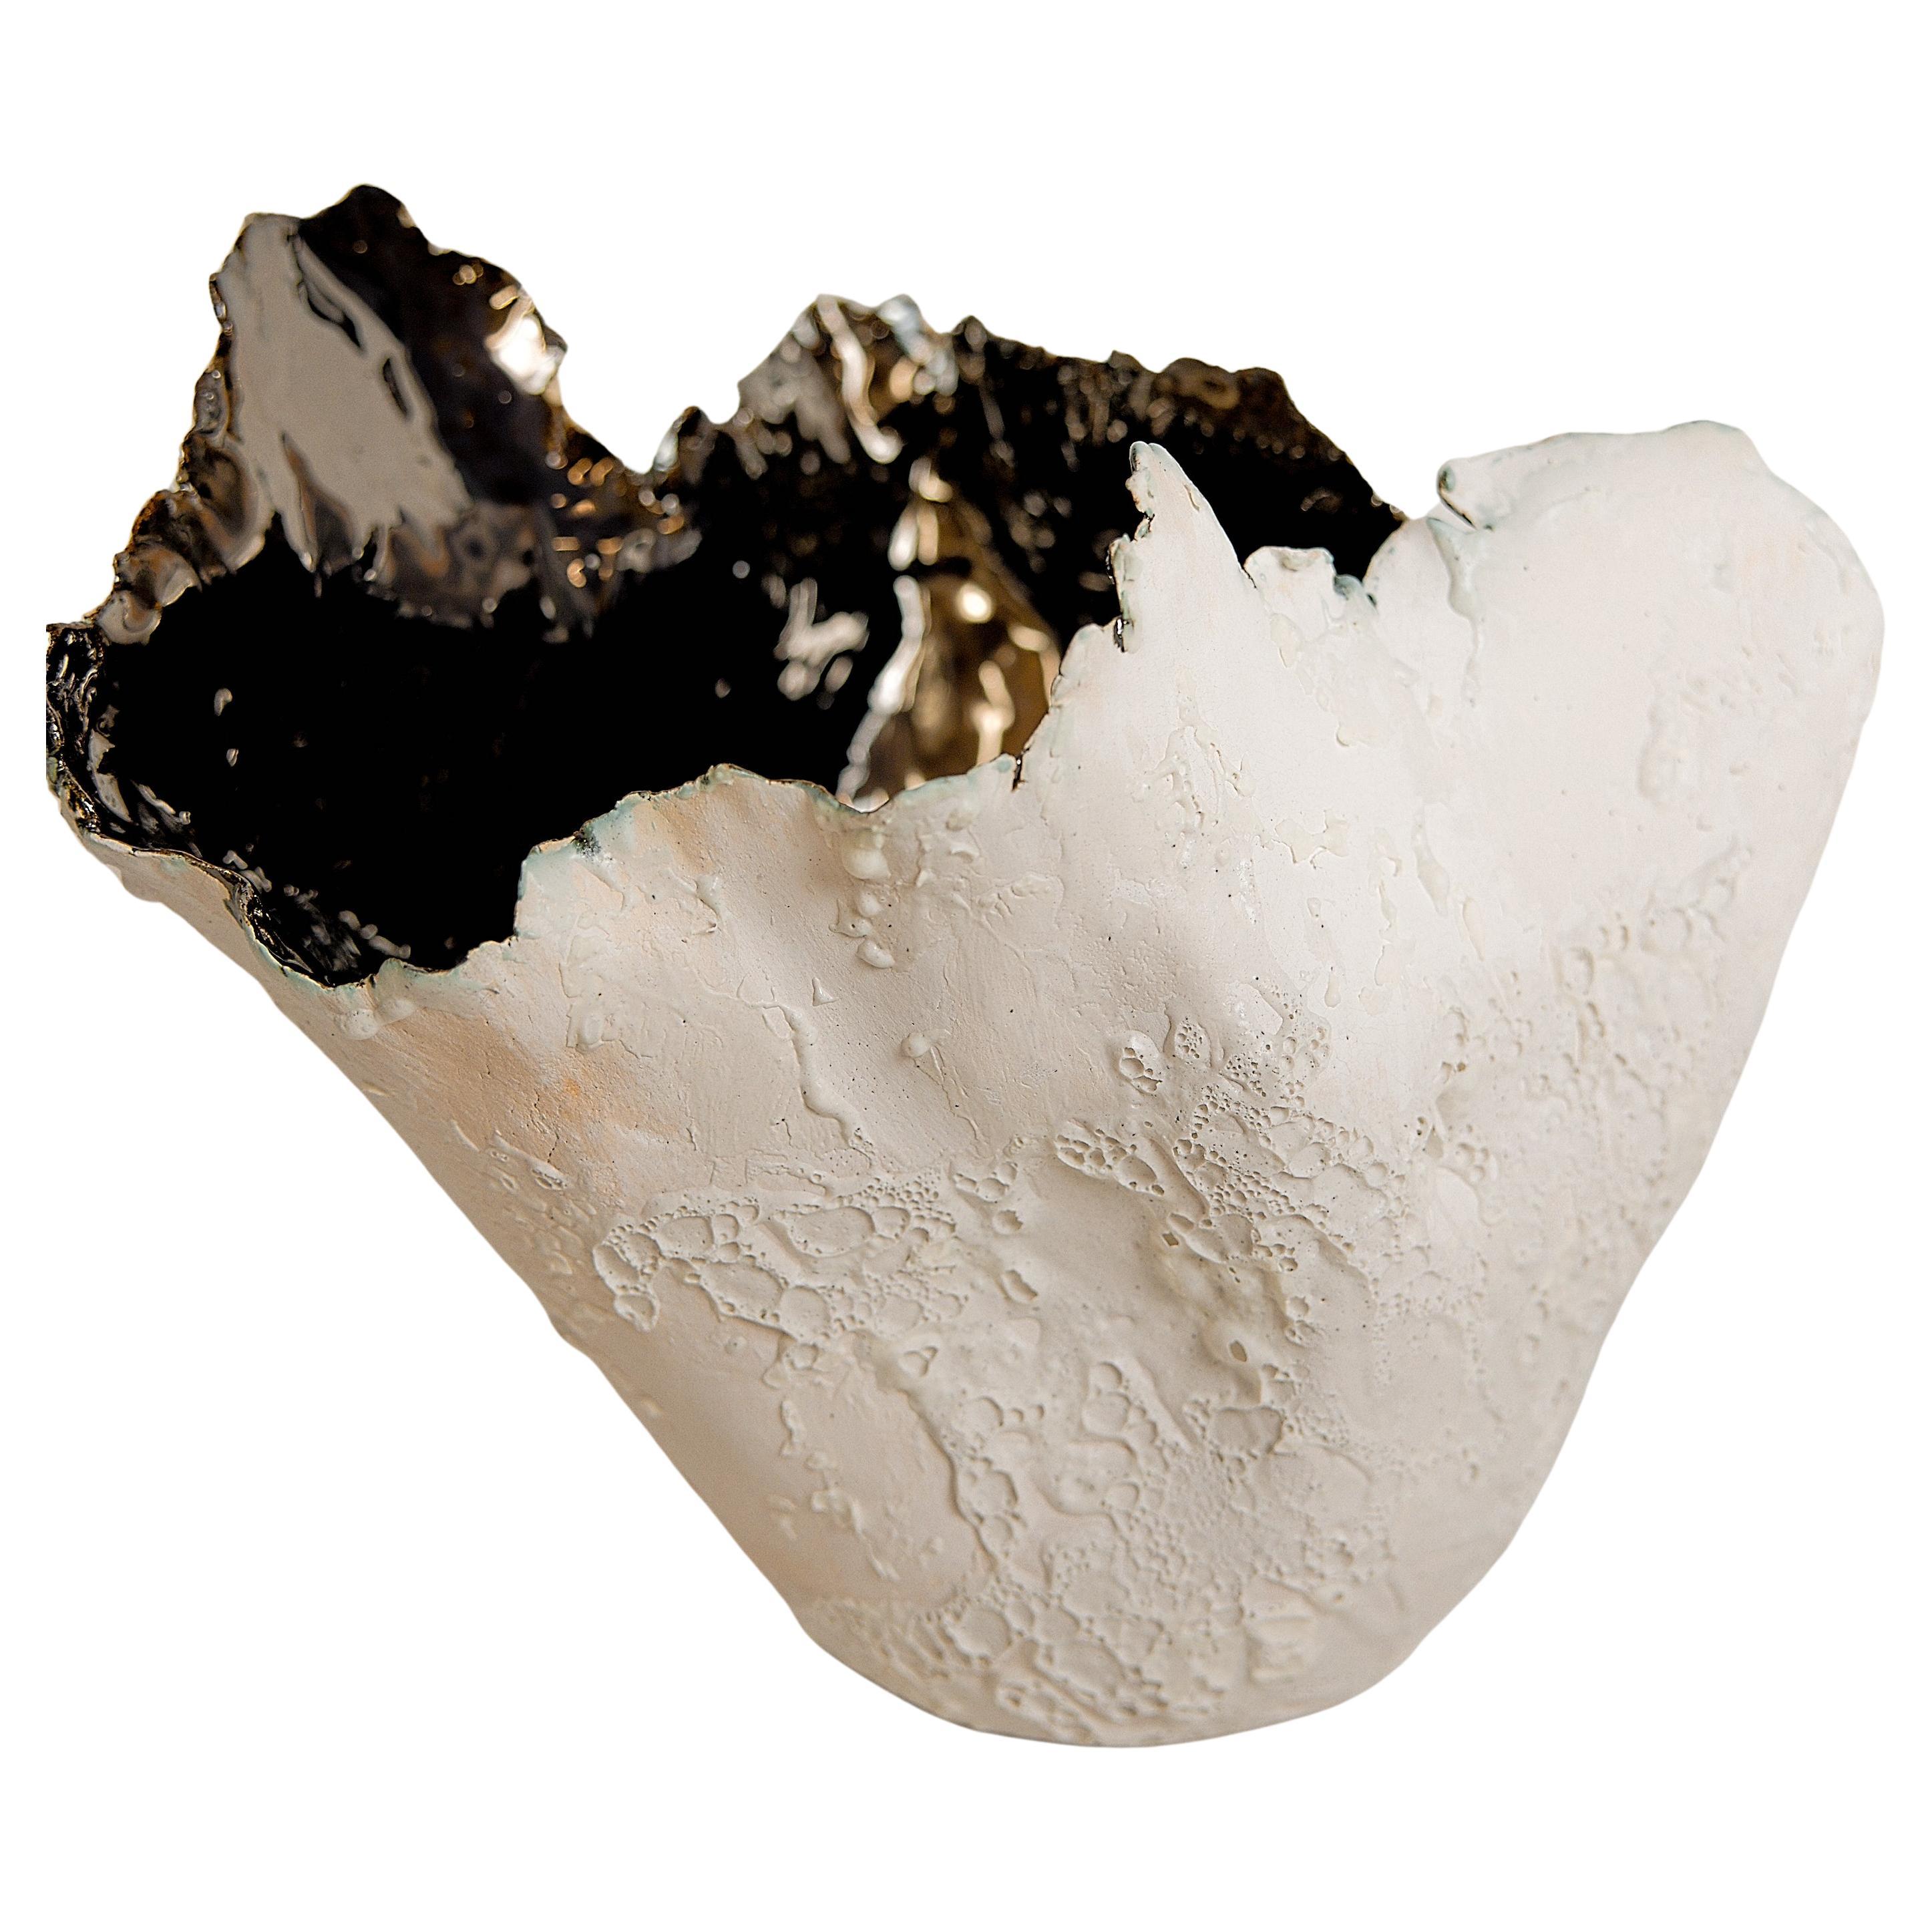 Bring a touch of modern style to your home with our Drift Torn Edge Vases
one of kind 
this White open  jar with Textured drips and lava glaze
one of a kind
Mirror glazed inside. one of a kind 

., each striking vase features a unique, moon-like